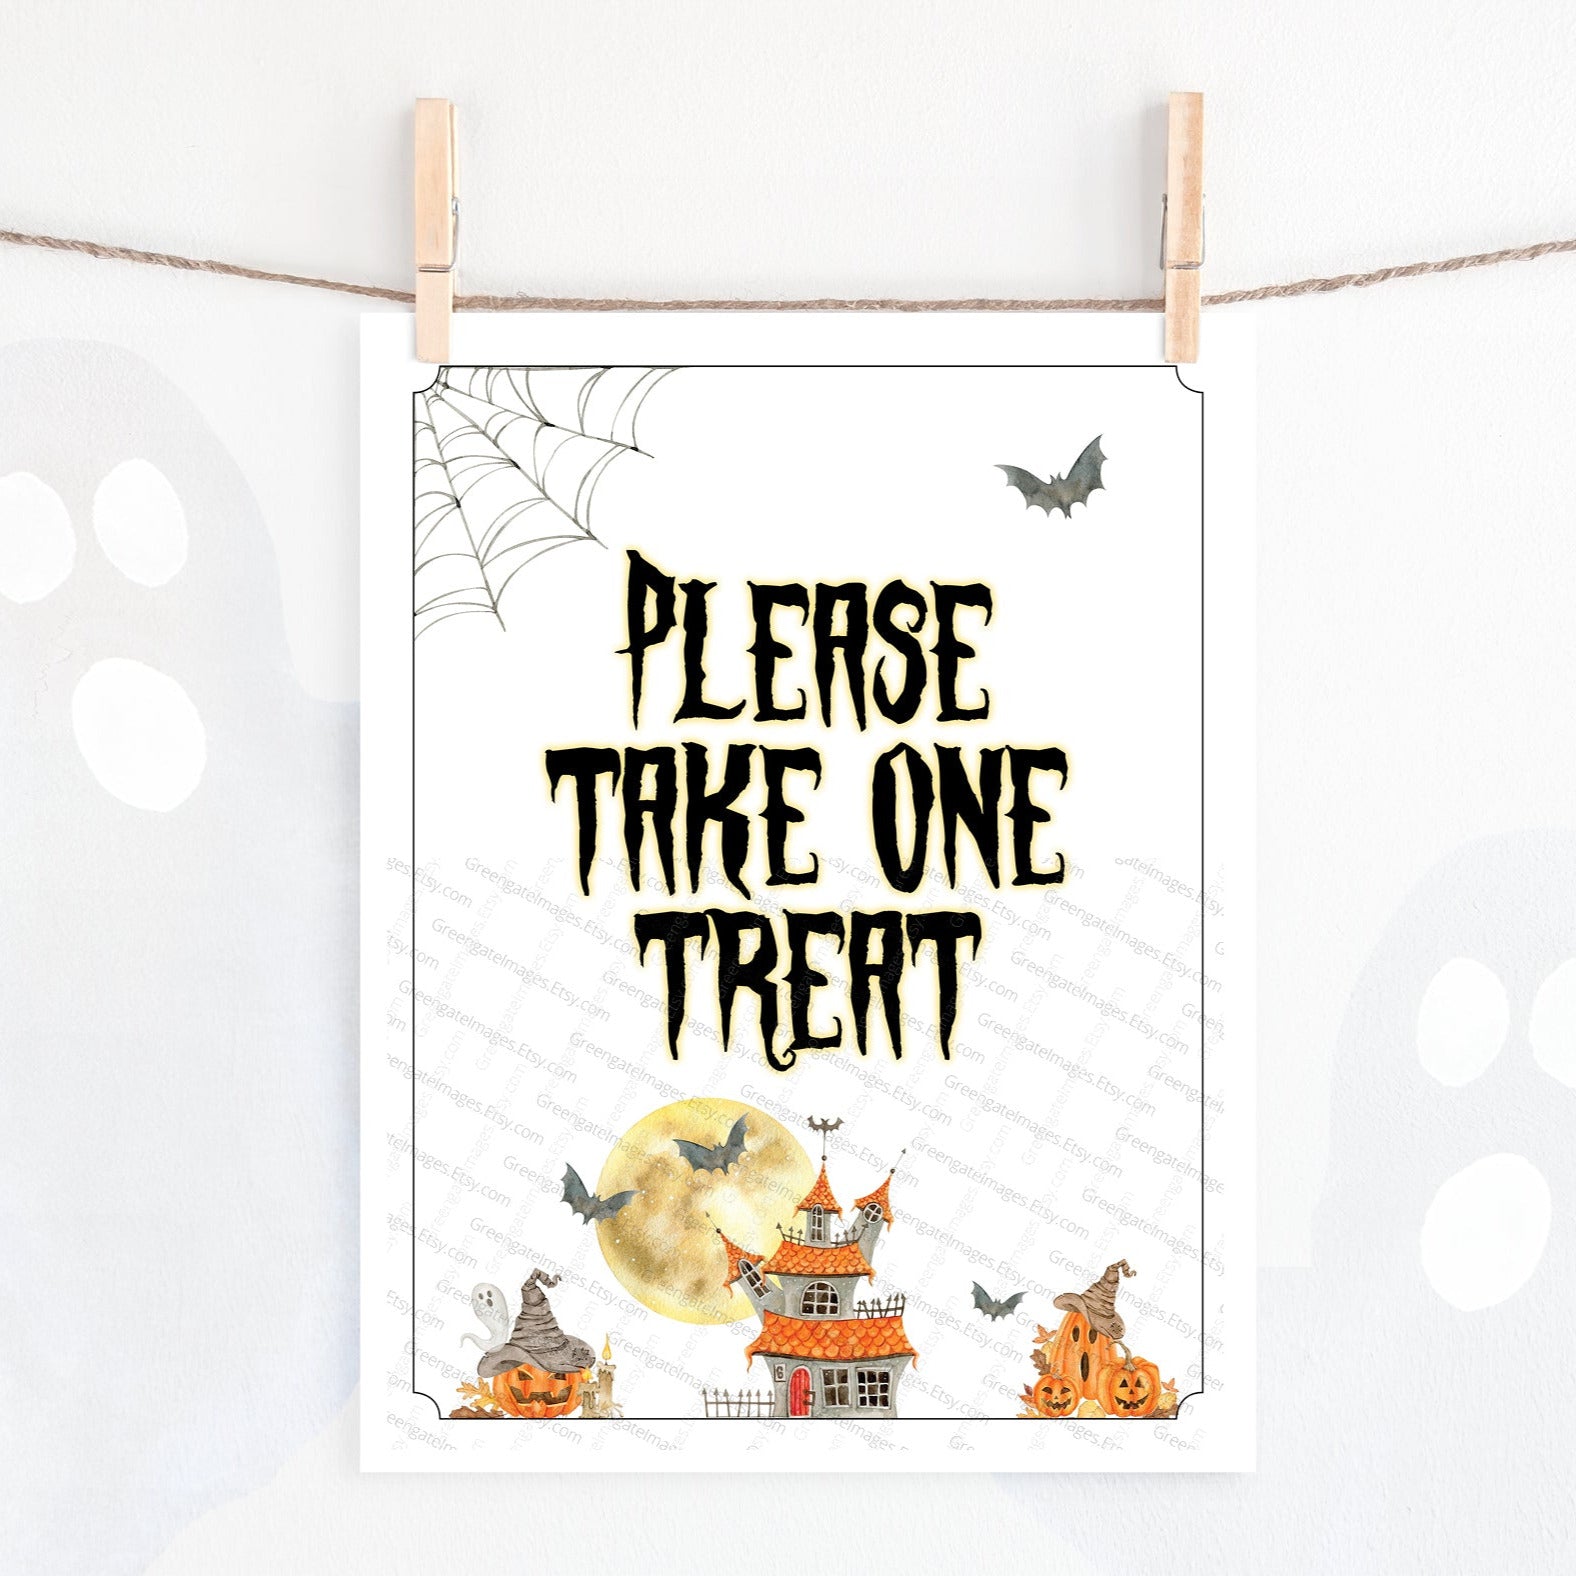 Haunted House Halloween Sign + Template